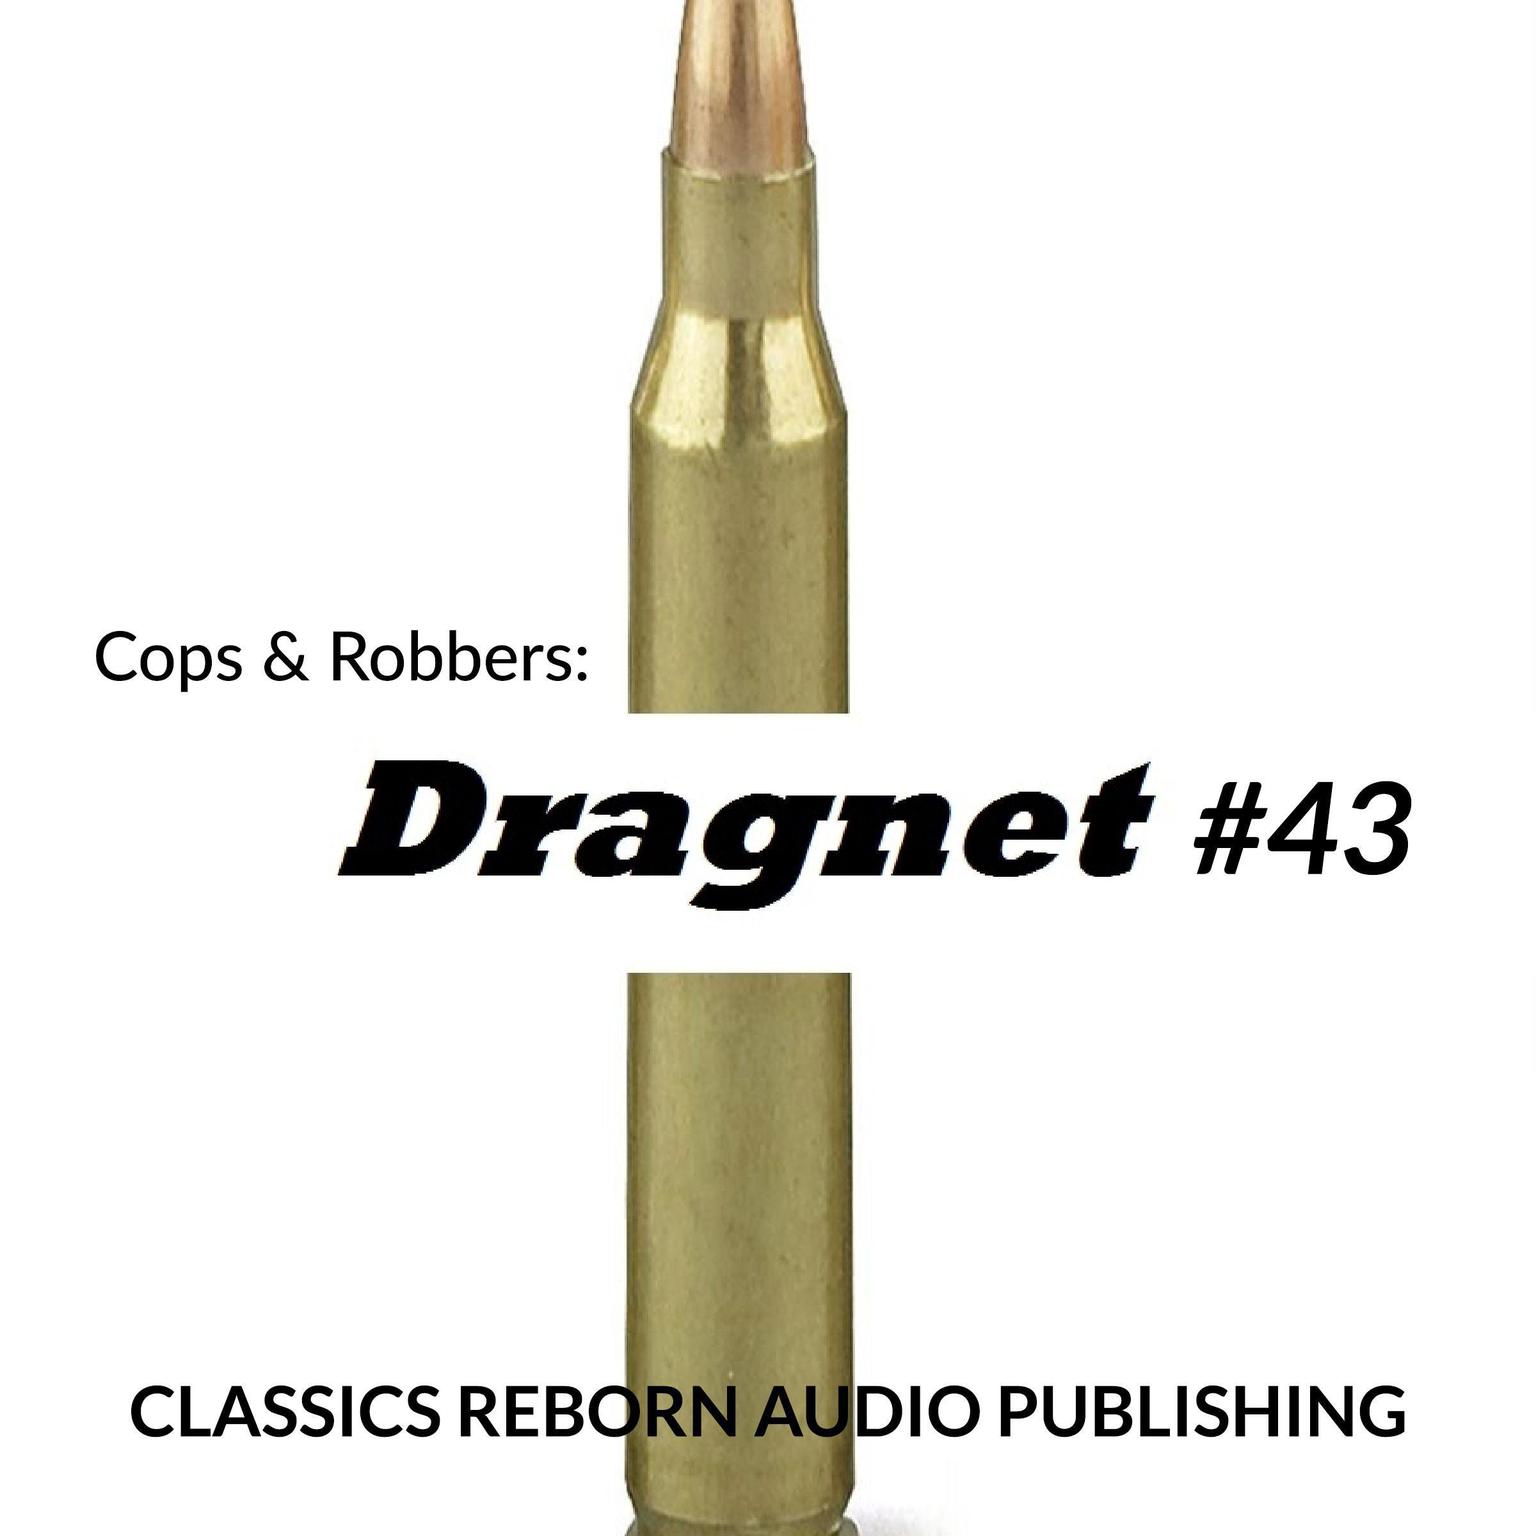 Cops & Robbers: Dragnet #43 Audiobook, by Classics Reborn Audio Publishing